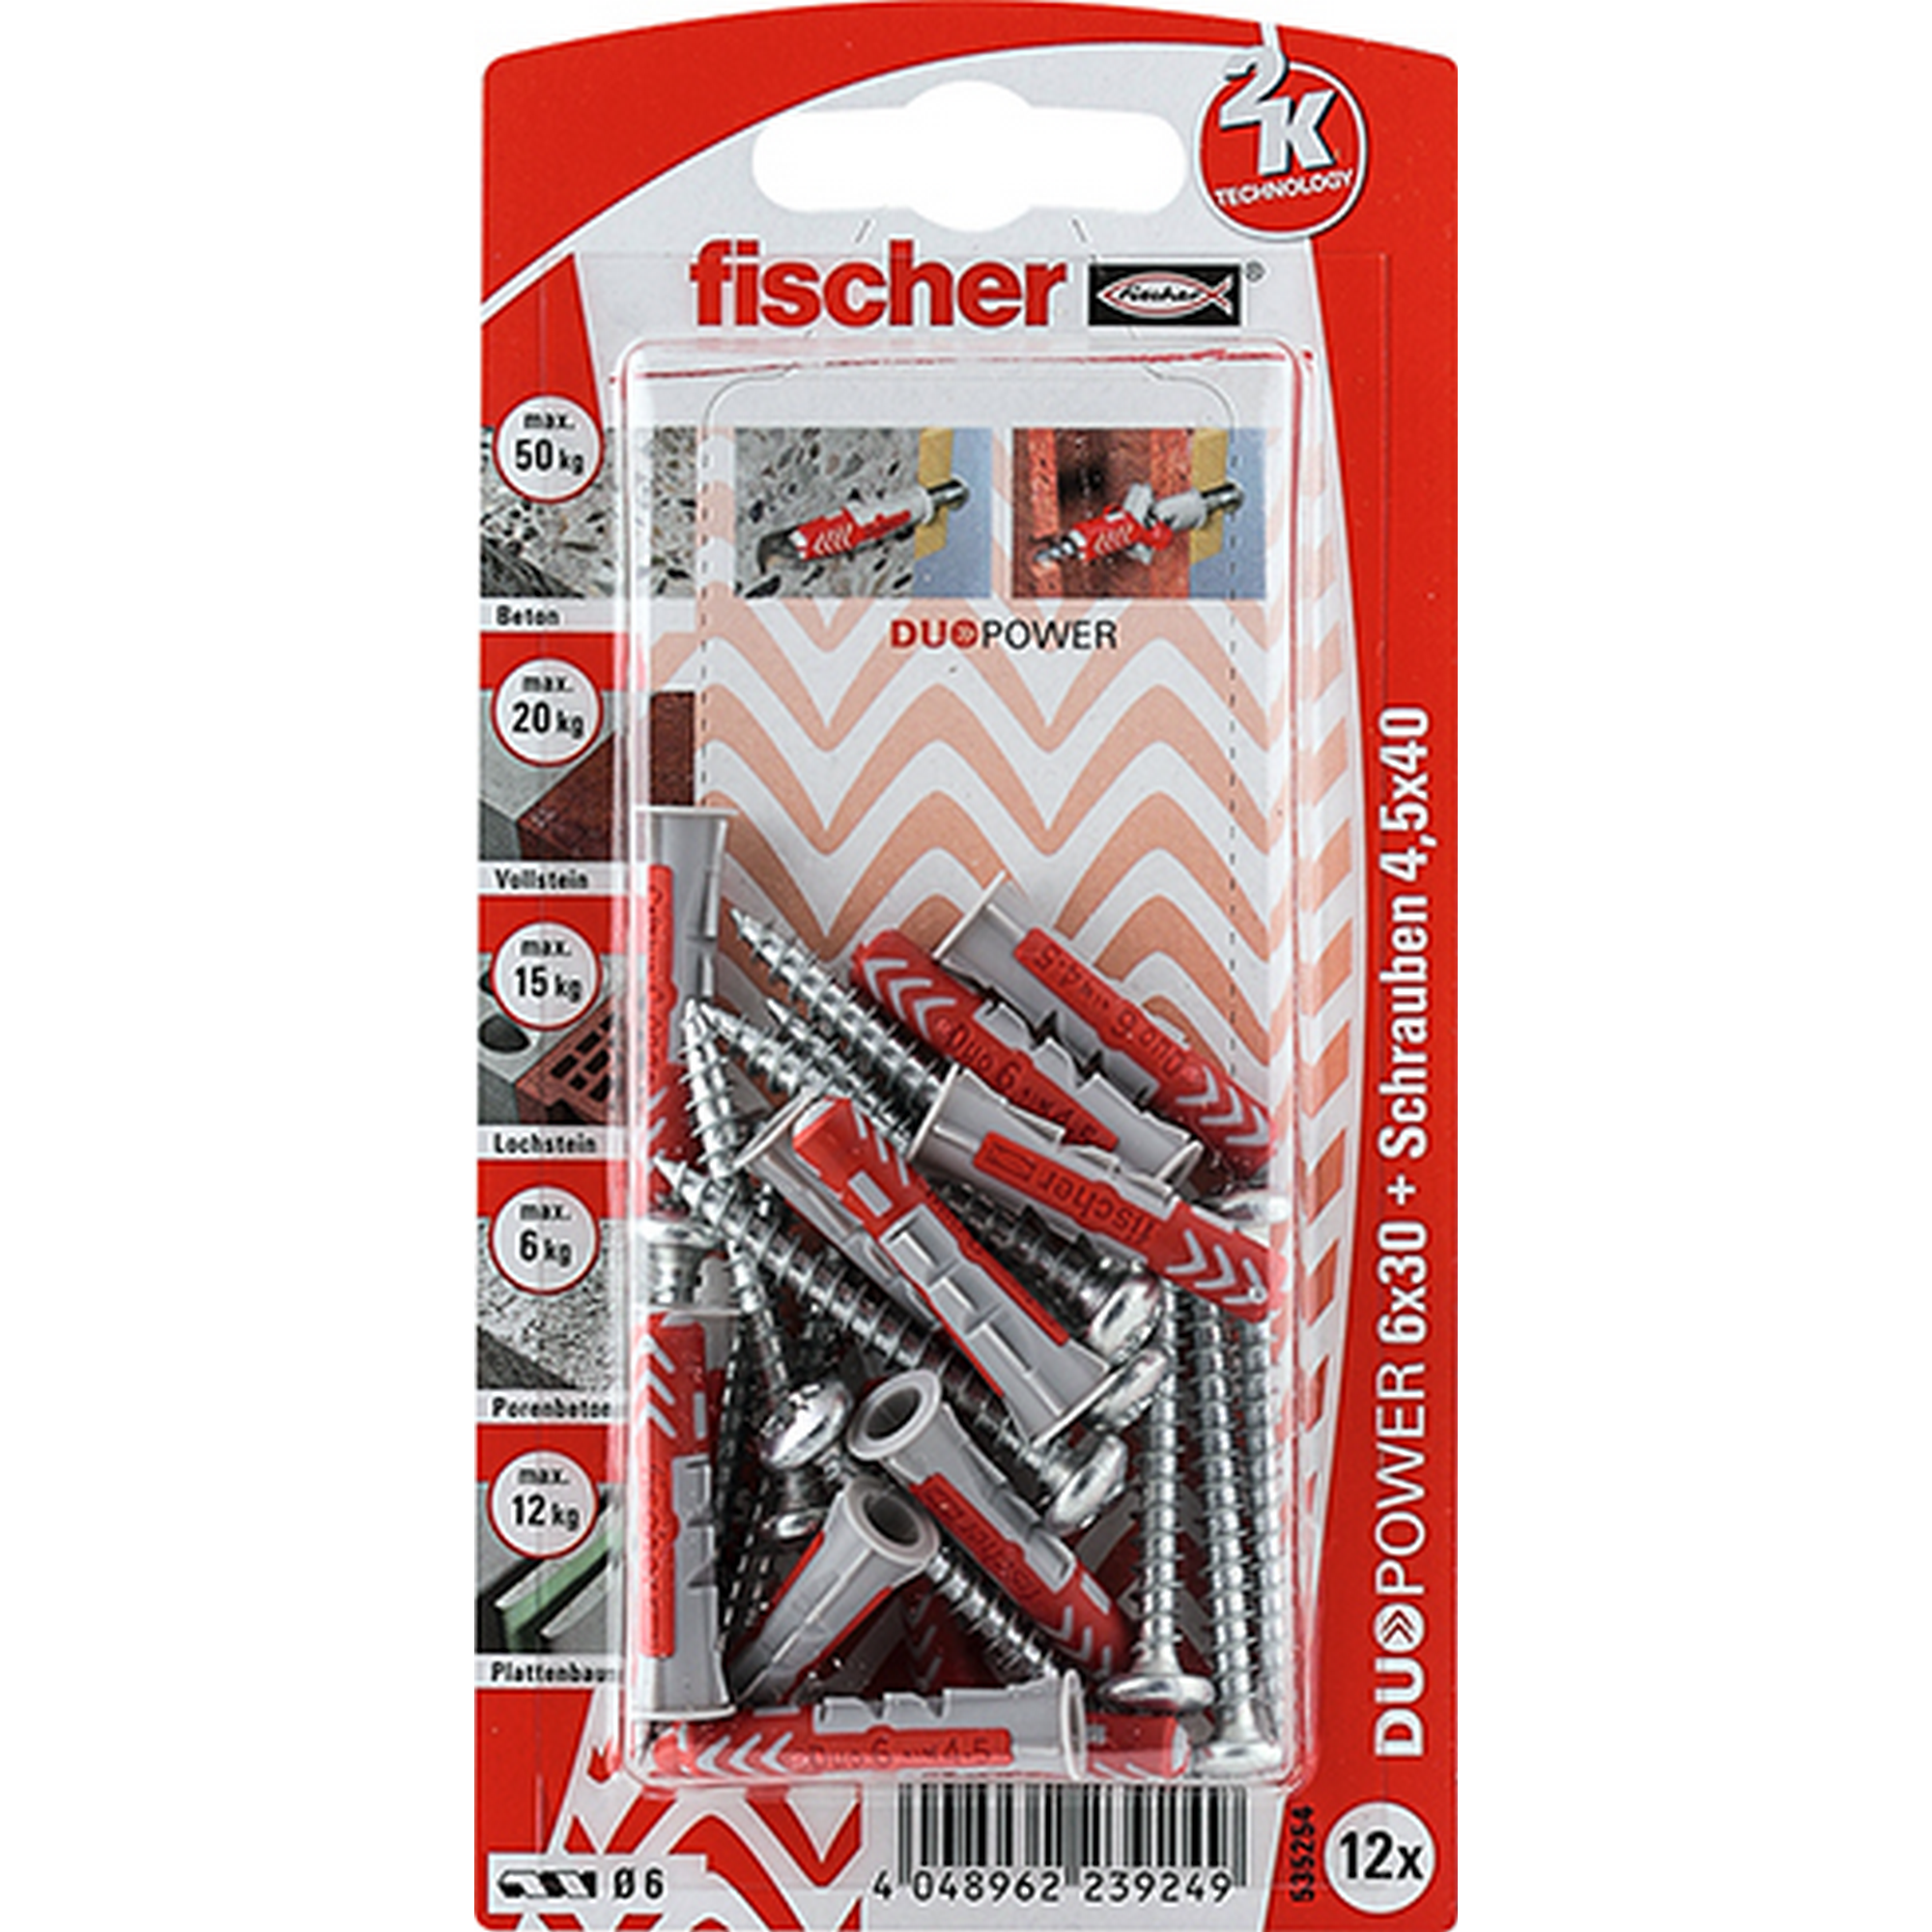 fischer DUOPOWER 6 x 30 S PH 12 Stück + product picture